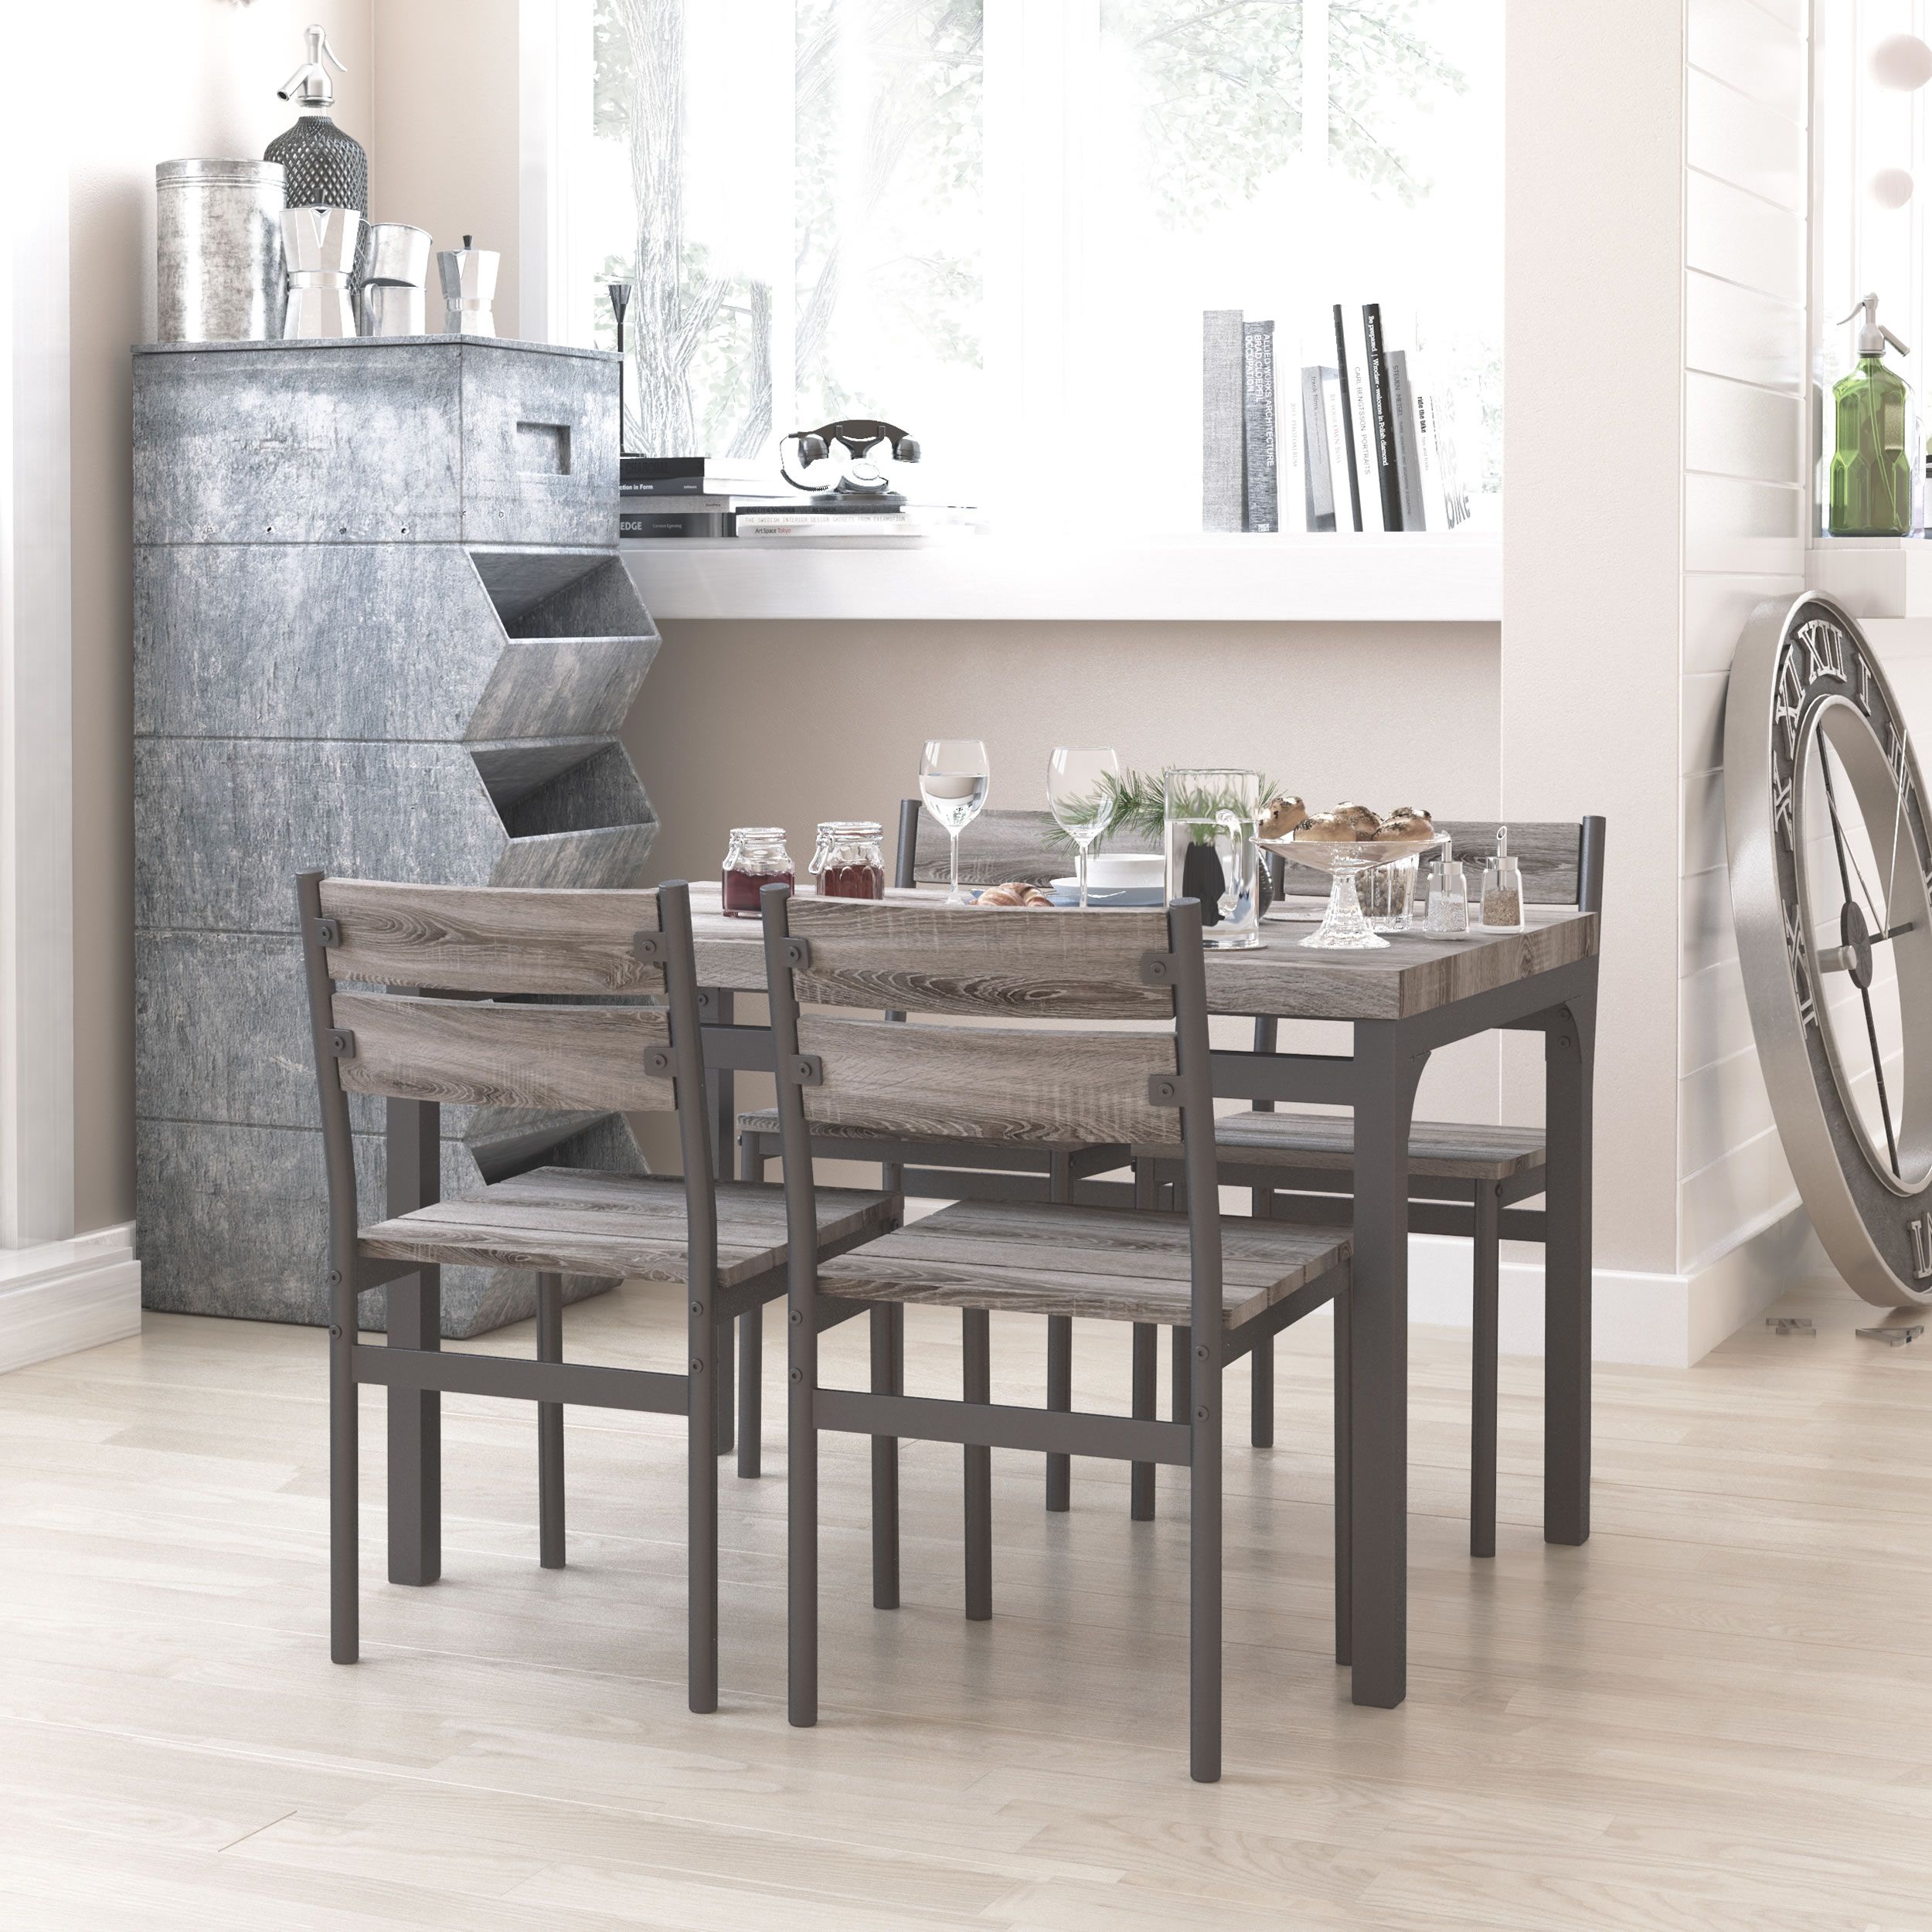 Zenvida 5 Piece Dining Set Rustic Grey Wooden Kitchen For Latest Gray Dining Tables (View 10 of 15)